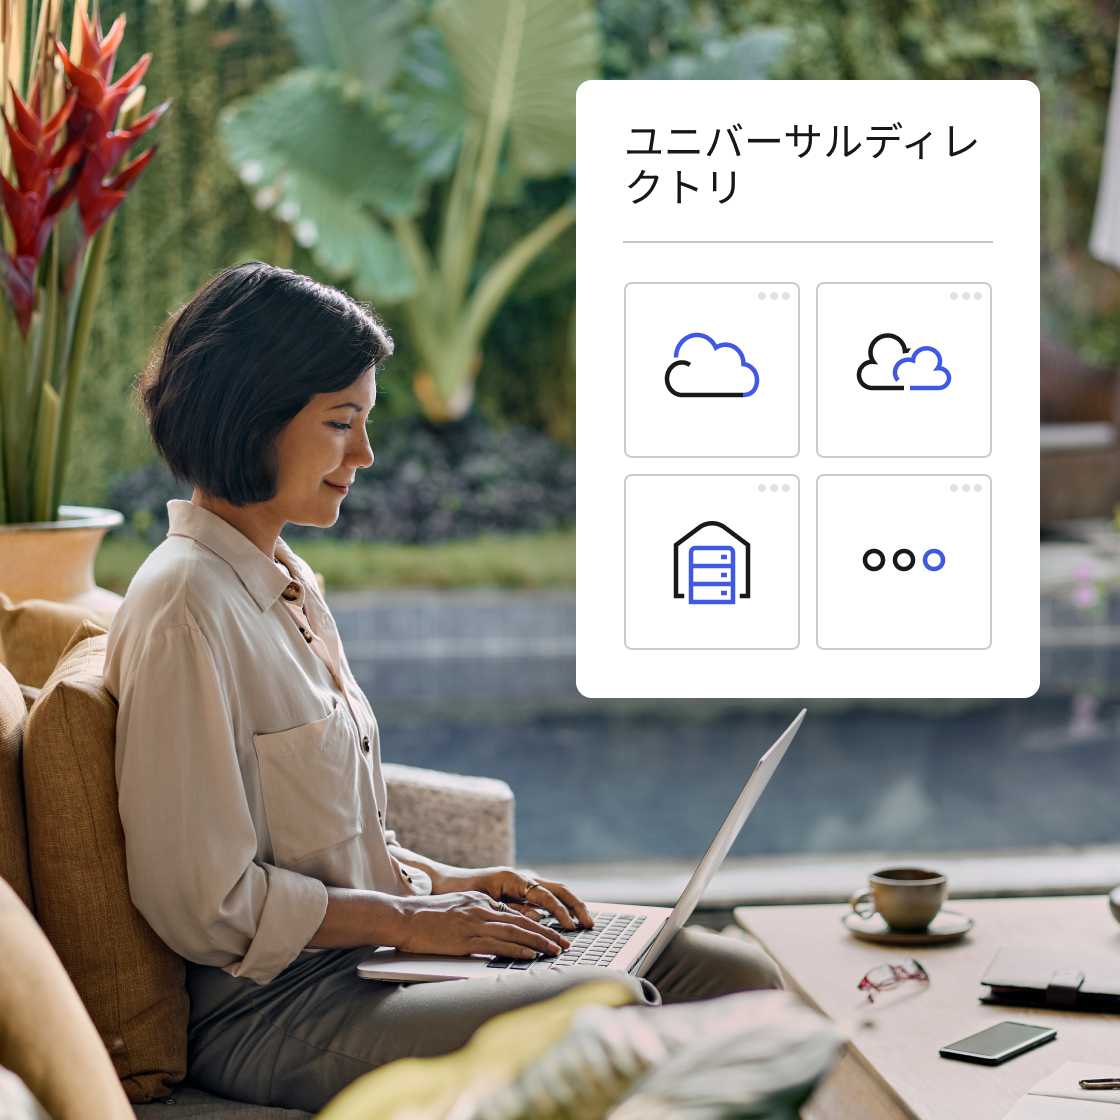 A graphic showing Universal Directory with four icons layered over an image of a woman working on her laptop.